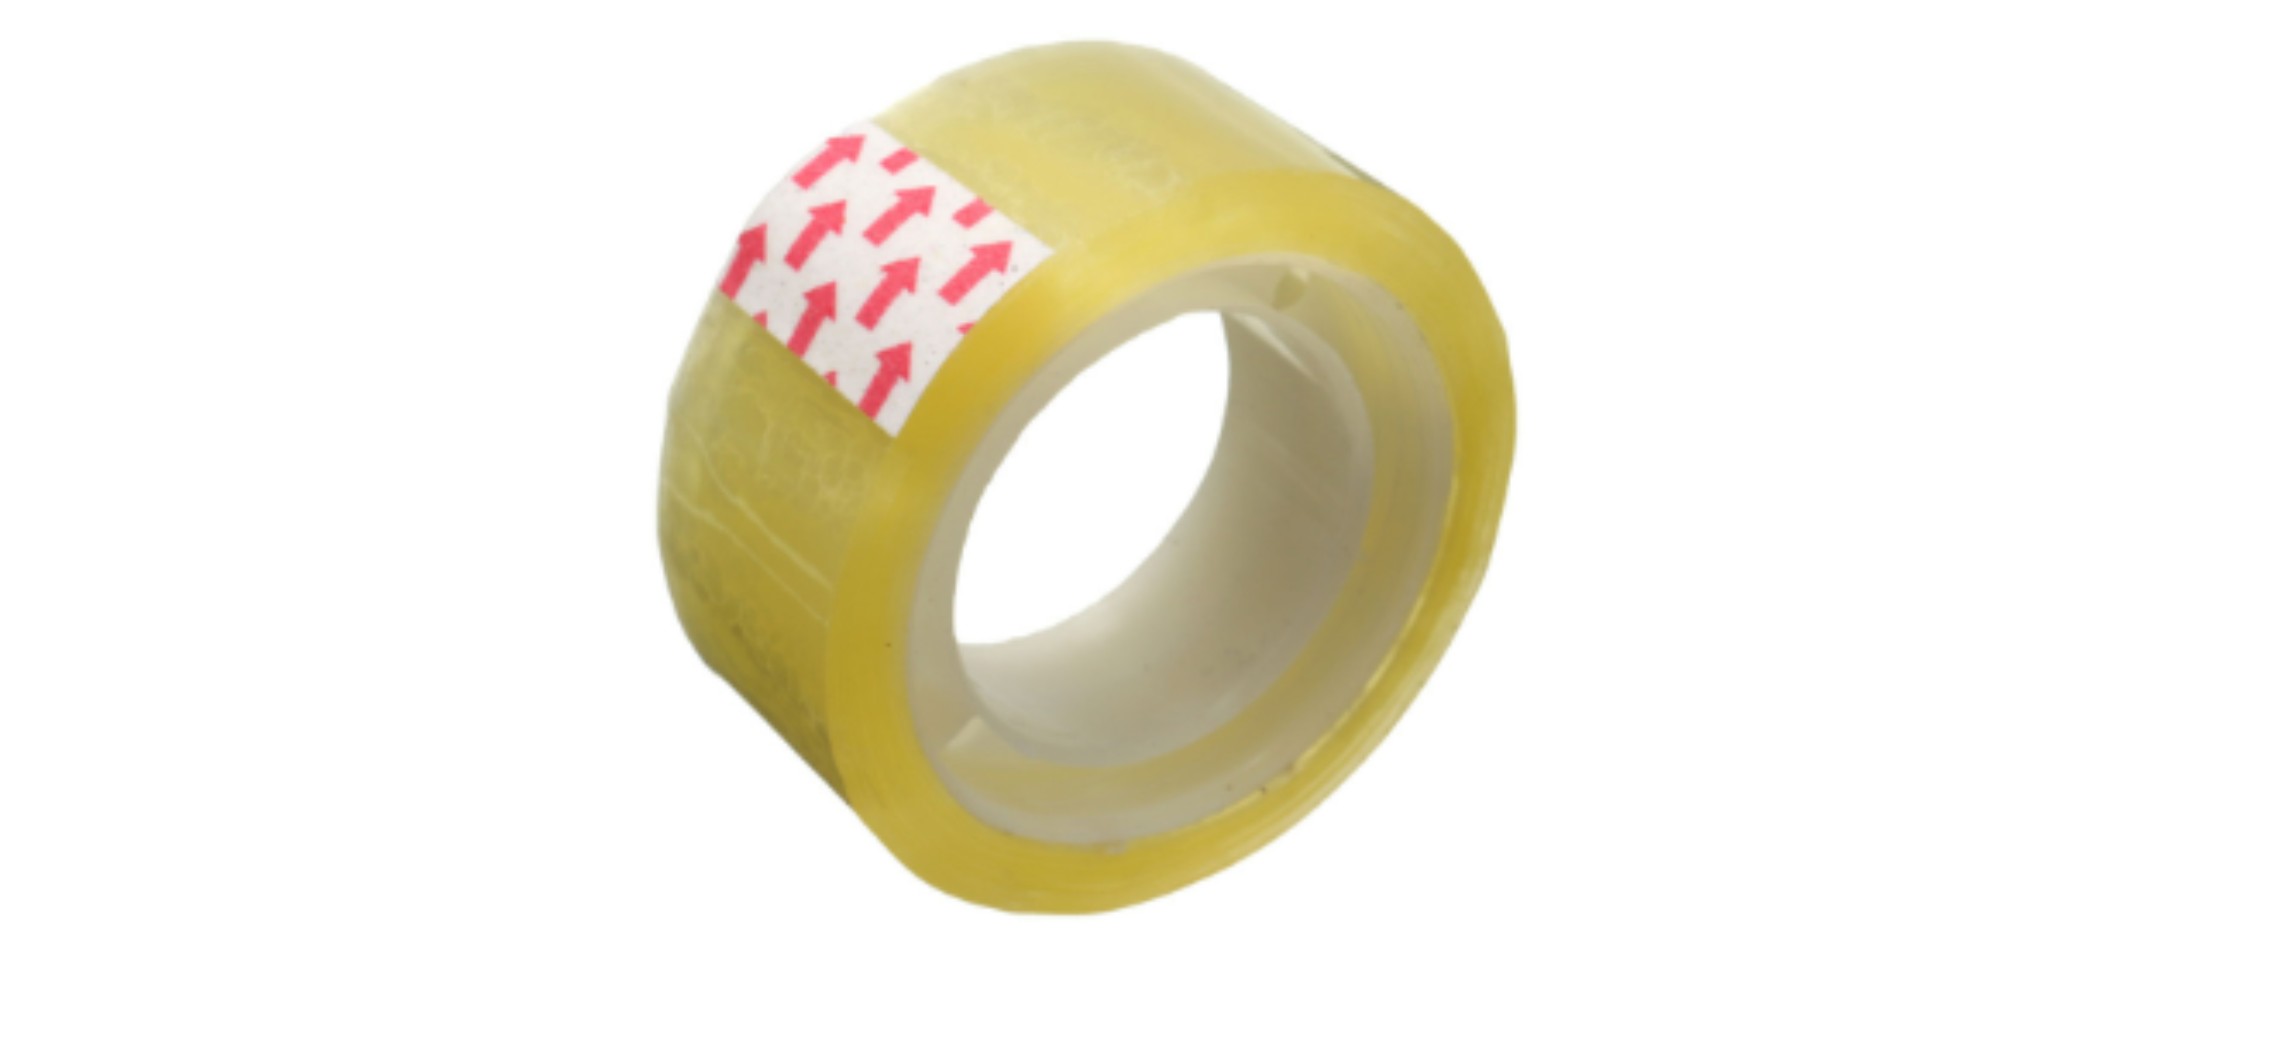 Adhesive Tape and its application